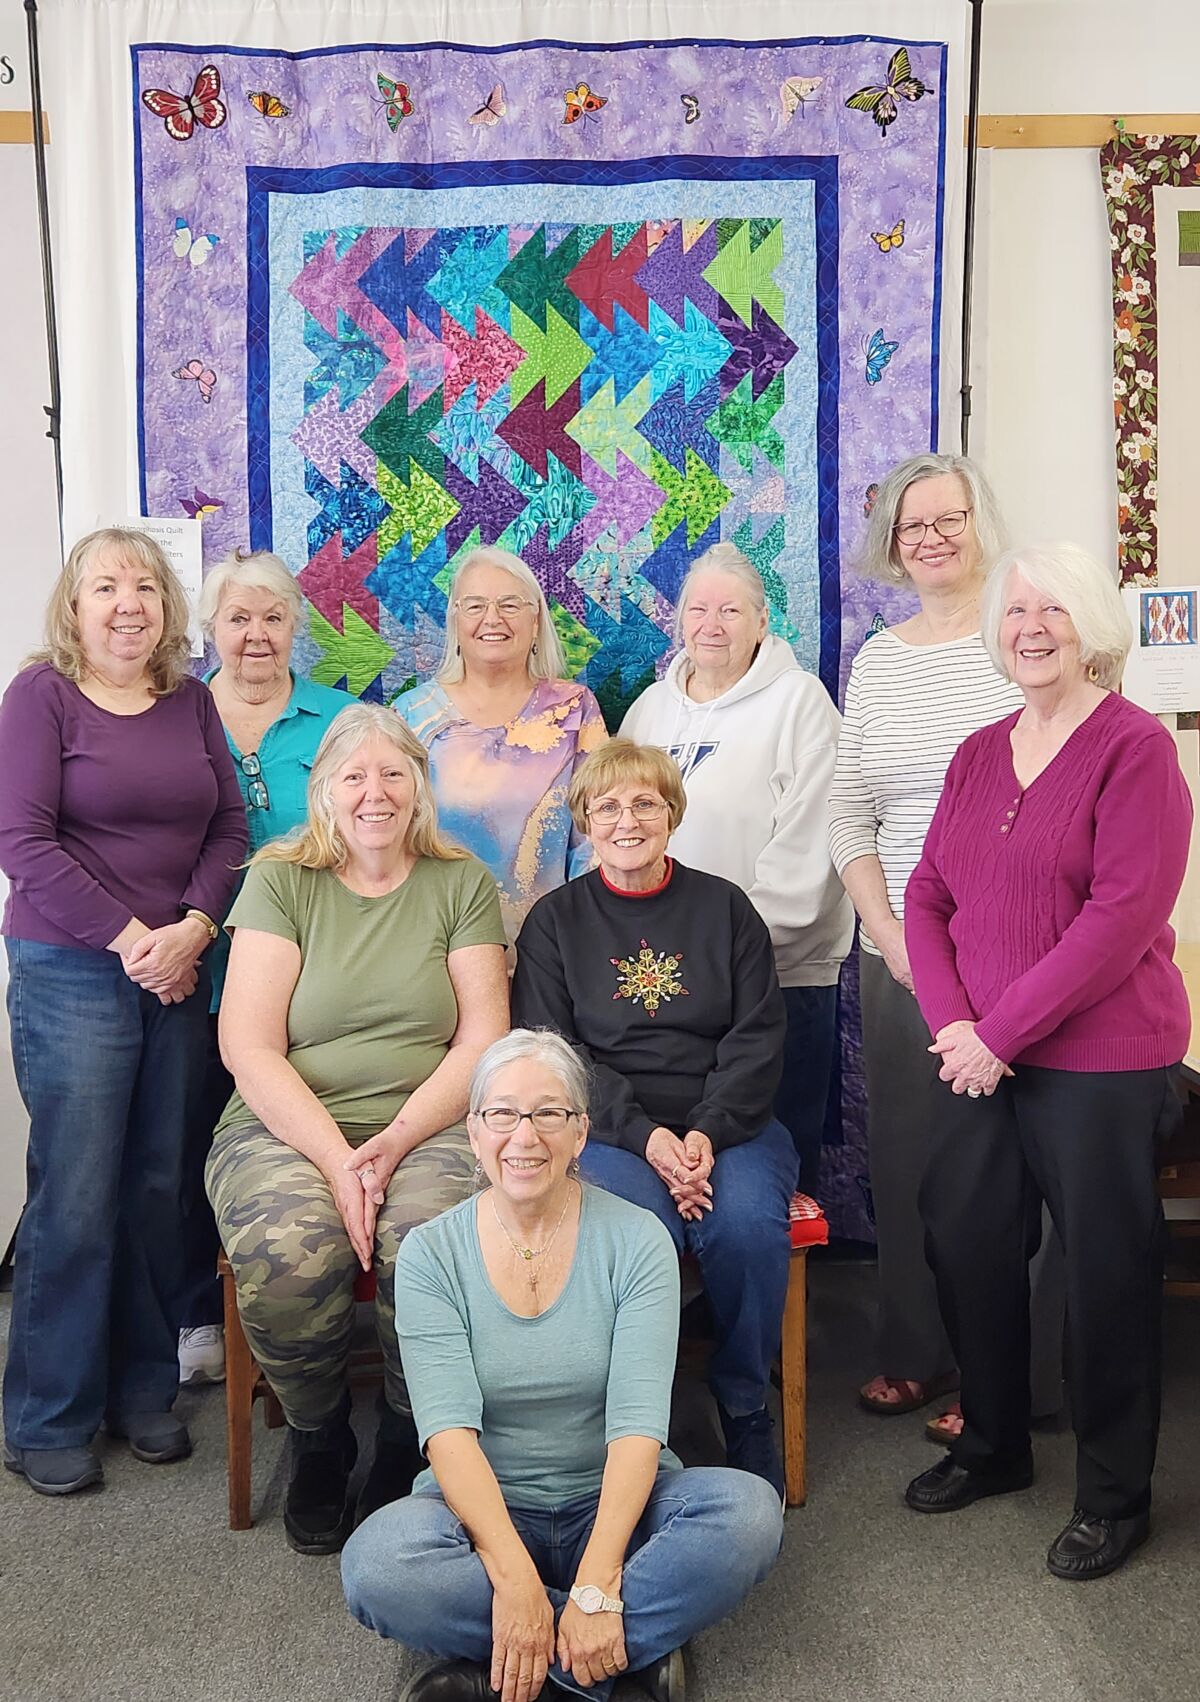 Ramona Backcountry Quilters recently donated this quilt, titled “Metamorphosis,” to the Ramona Senior Center for fundraising.